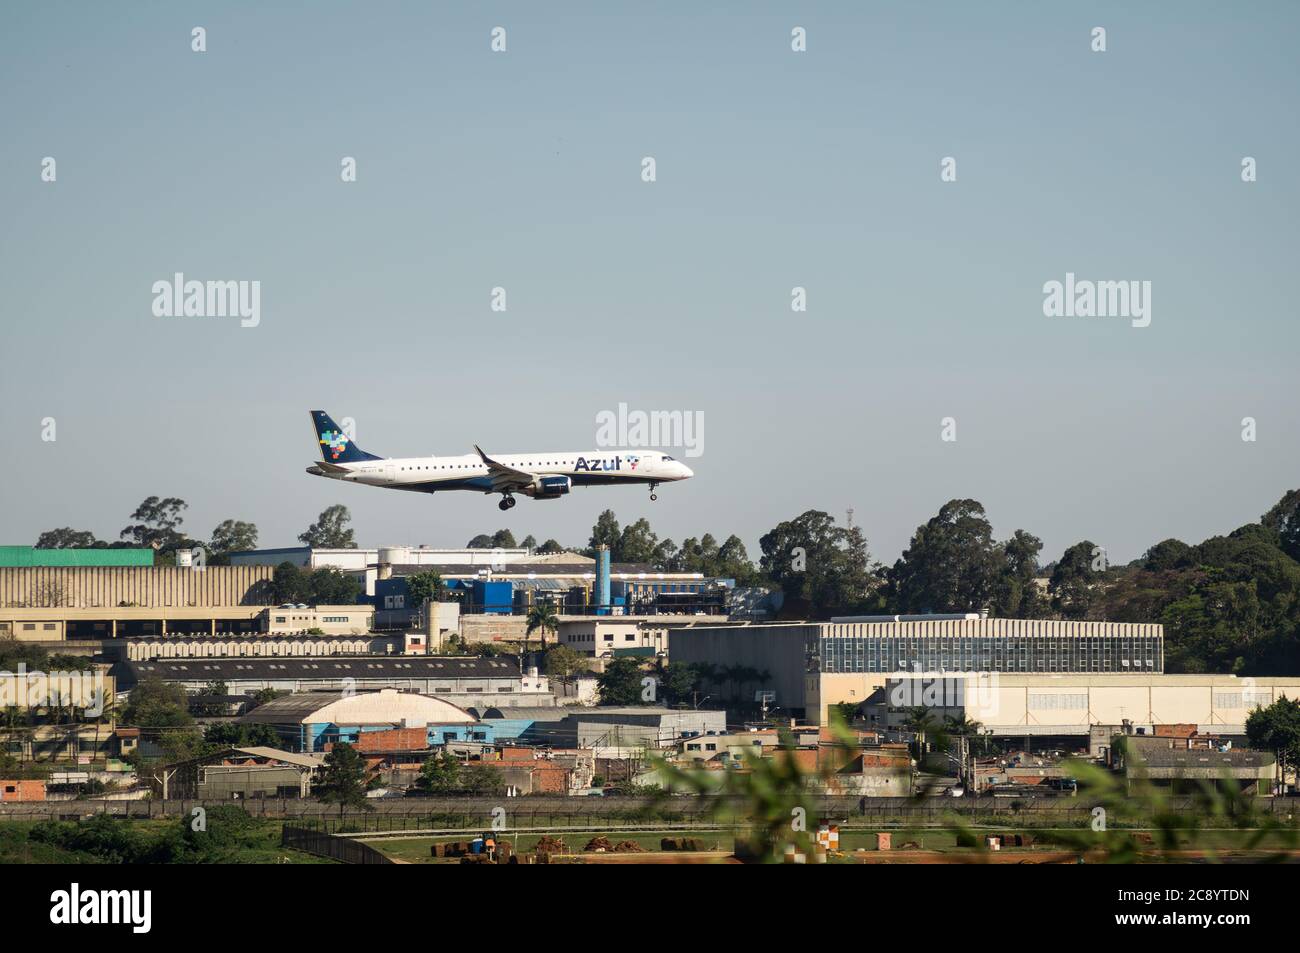 Azul Airlines Embraer 190/195 (Reg. PR-AXY - Type 195AR) at short final, moments before land on runway 27R of Sao Paulo/Guarulhos Intl. Airport. Stock Photo